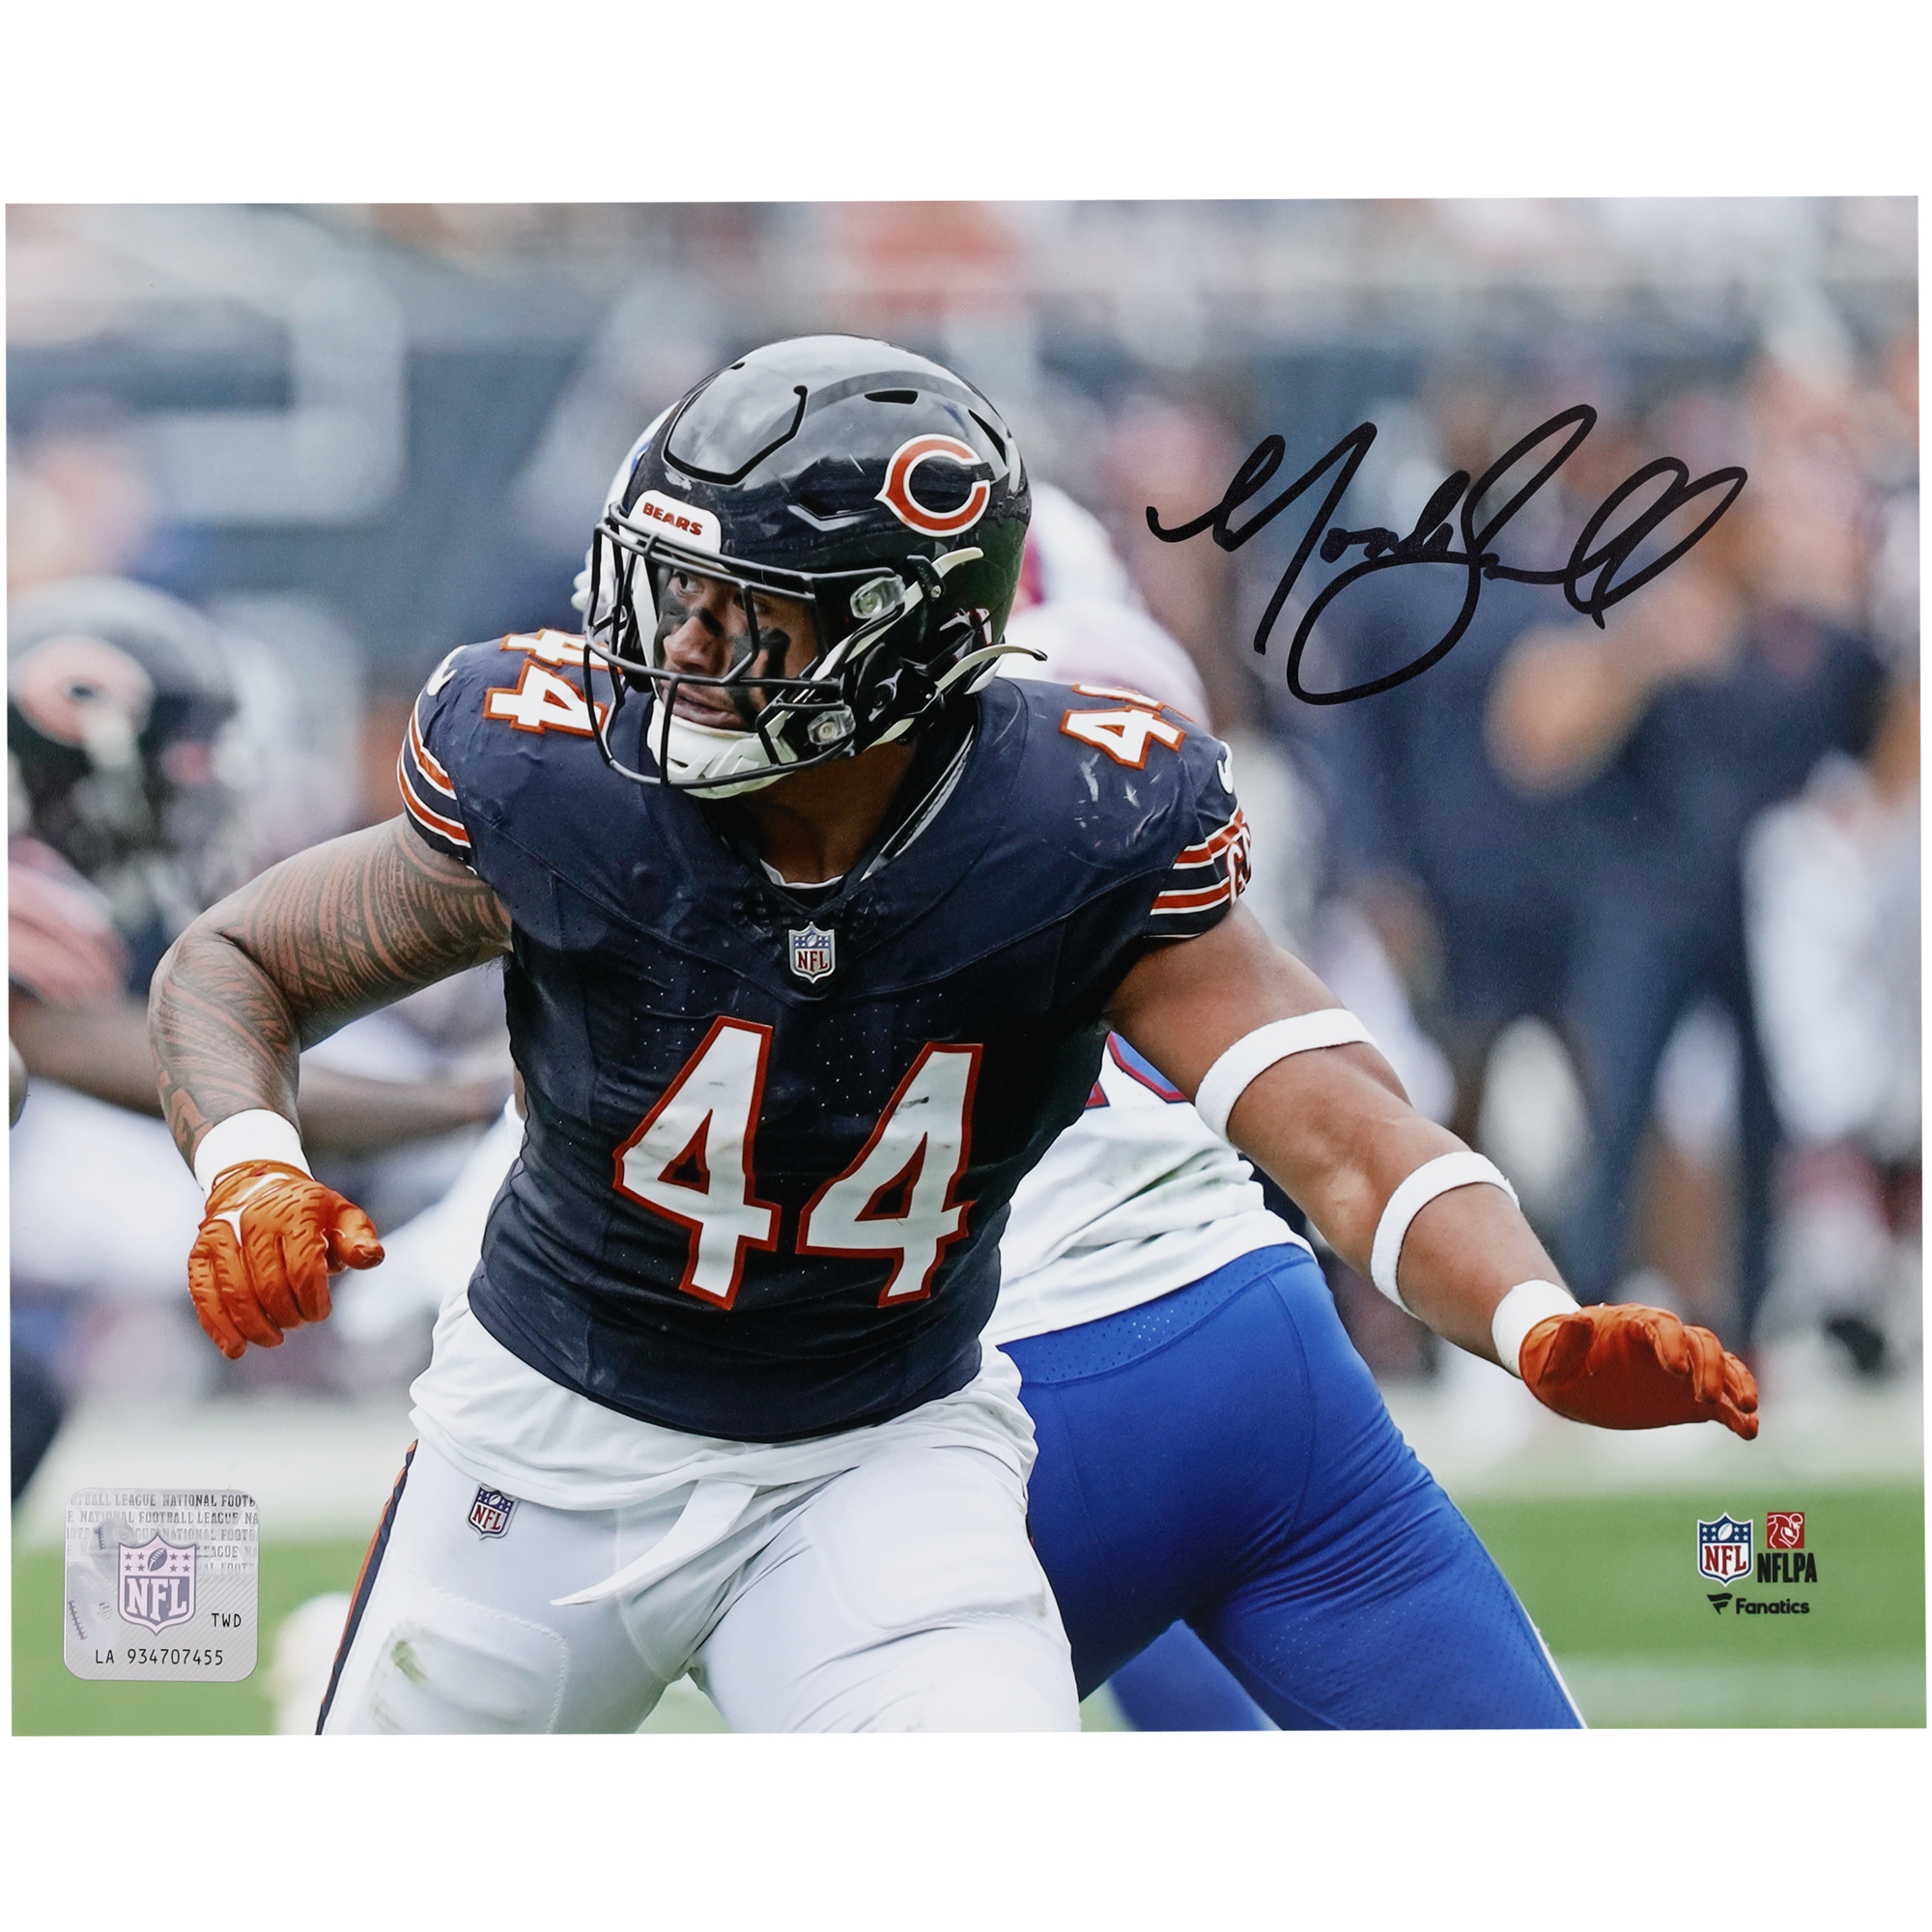 Noah Sewell Chicago Bears signiertes Actionfoto im Querformat, 20,3 x 25,4 cm